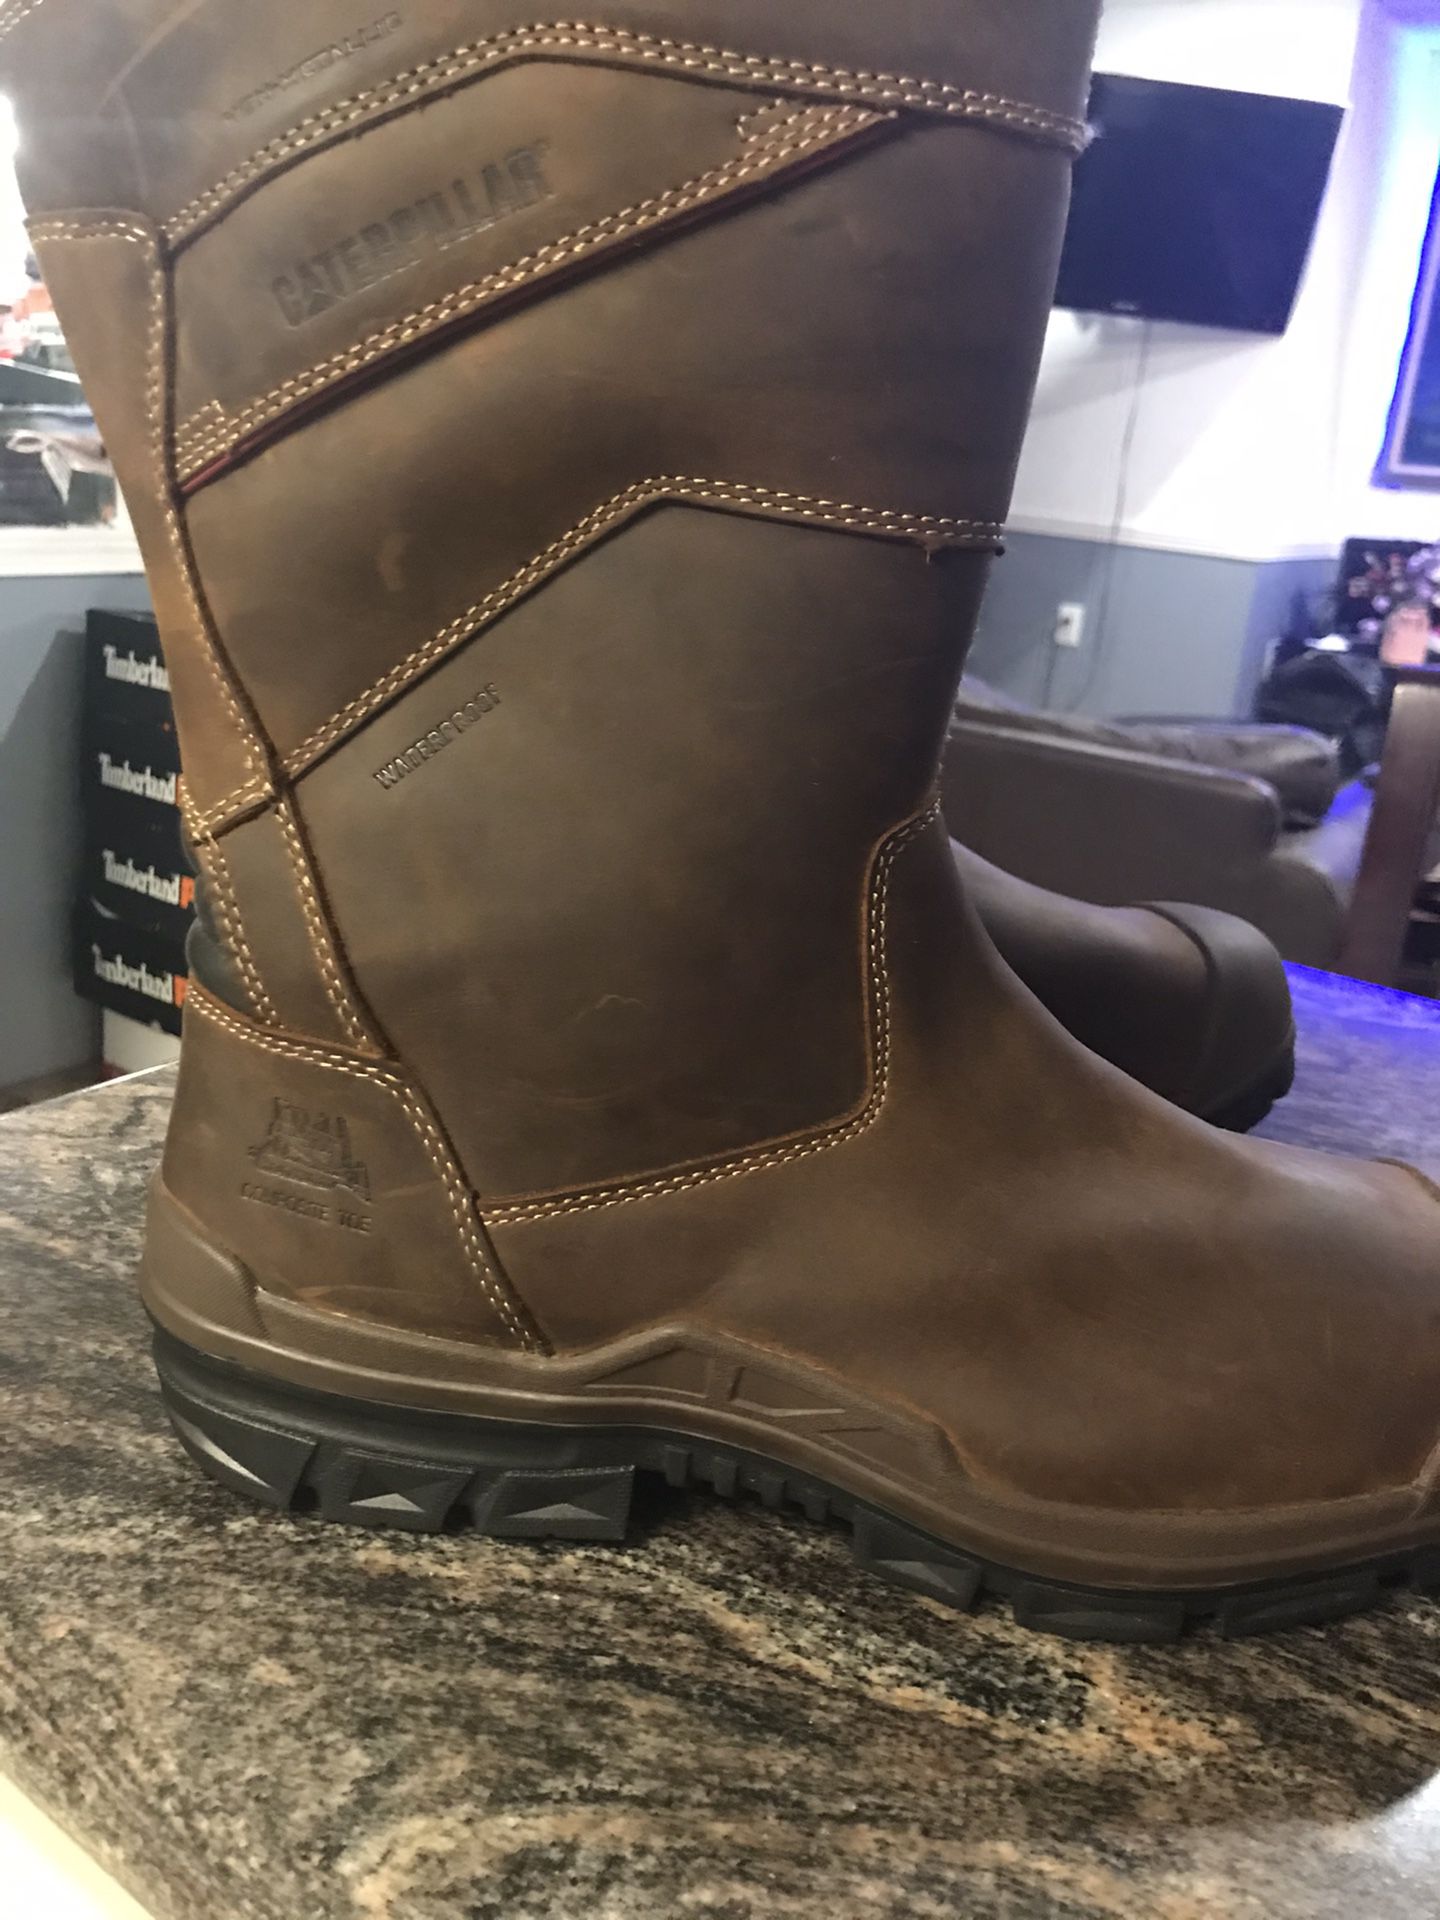 Work boots//Caterpillar//New/Men's Differential Waterproof Composite Toe Work Boot//size (13) //New//Without box //Special deal.